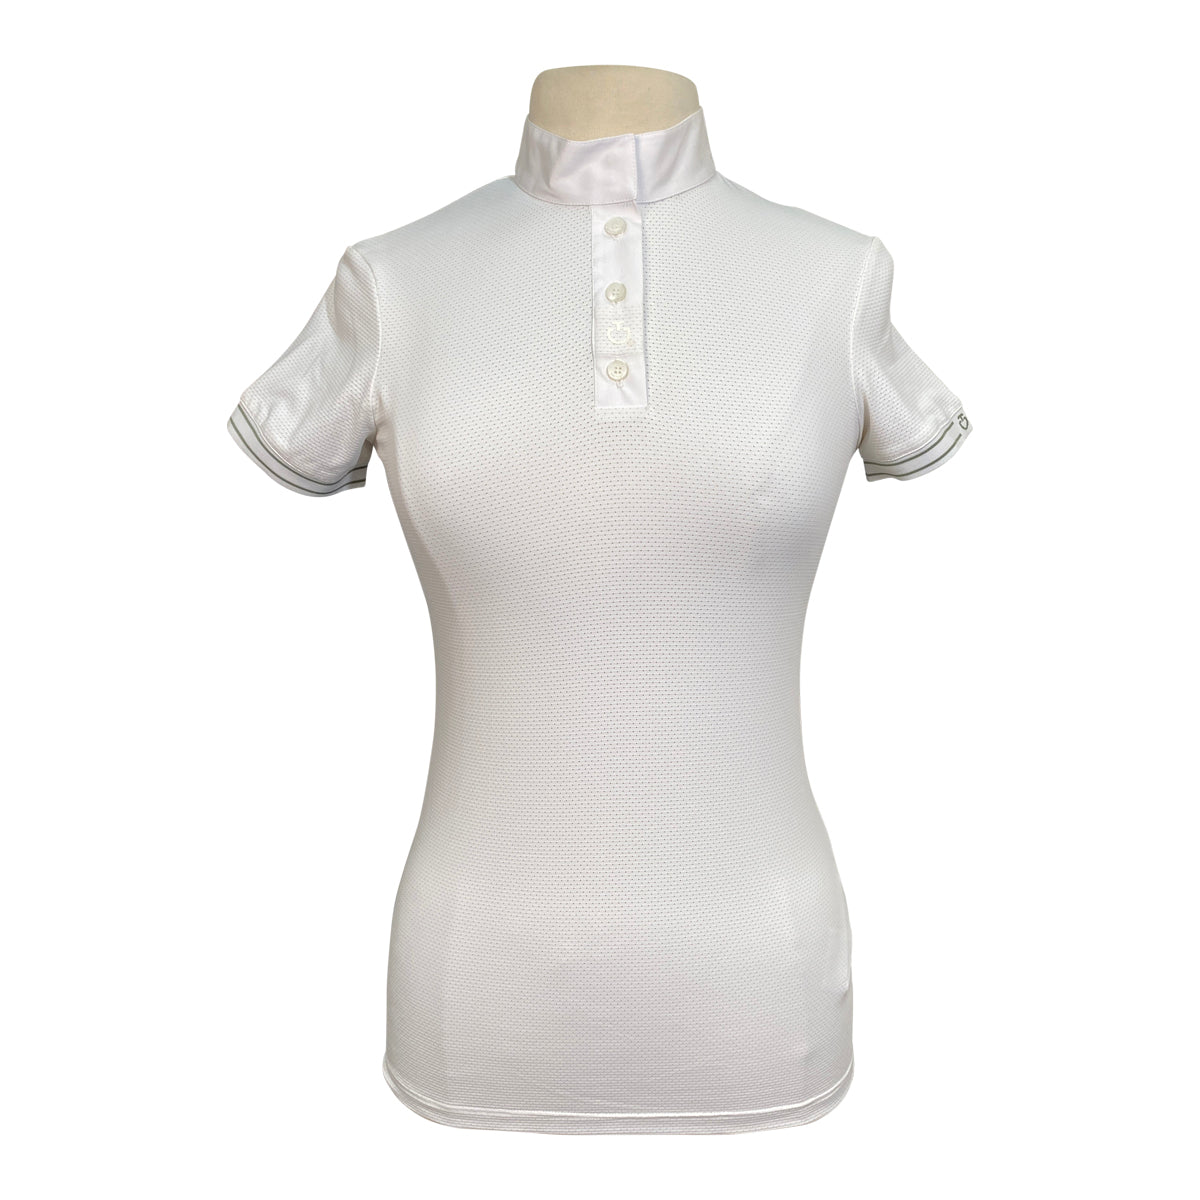 Cavalleria Toscana Tech Mesh Rib Knit S/S Competition Polo in White